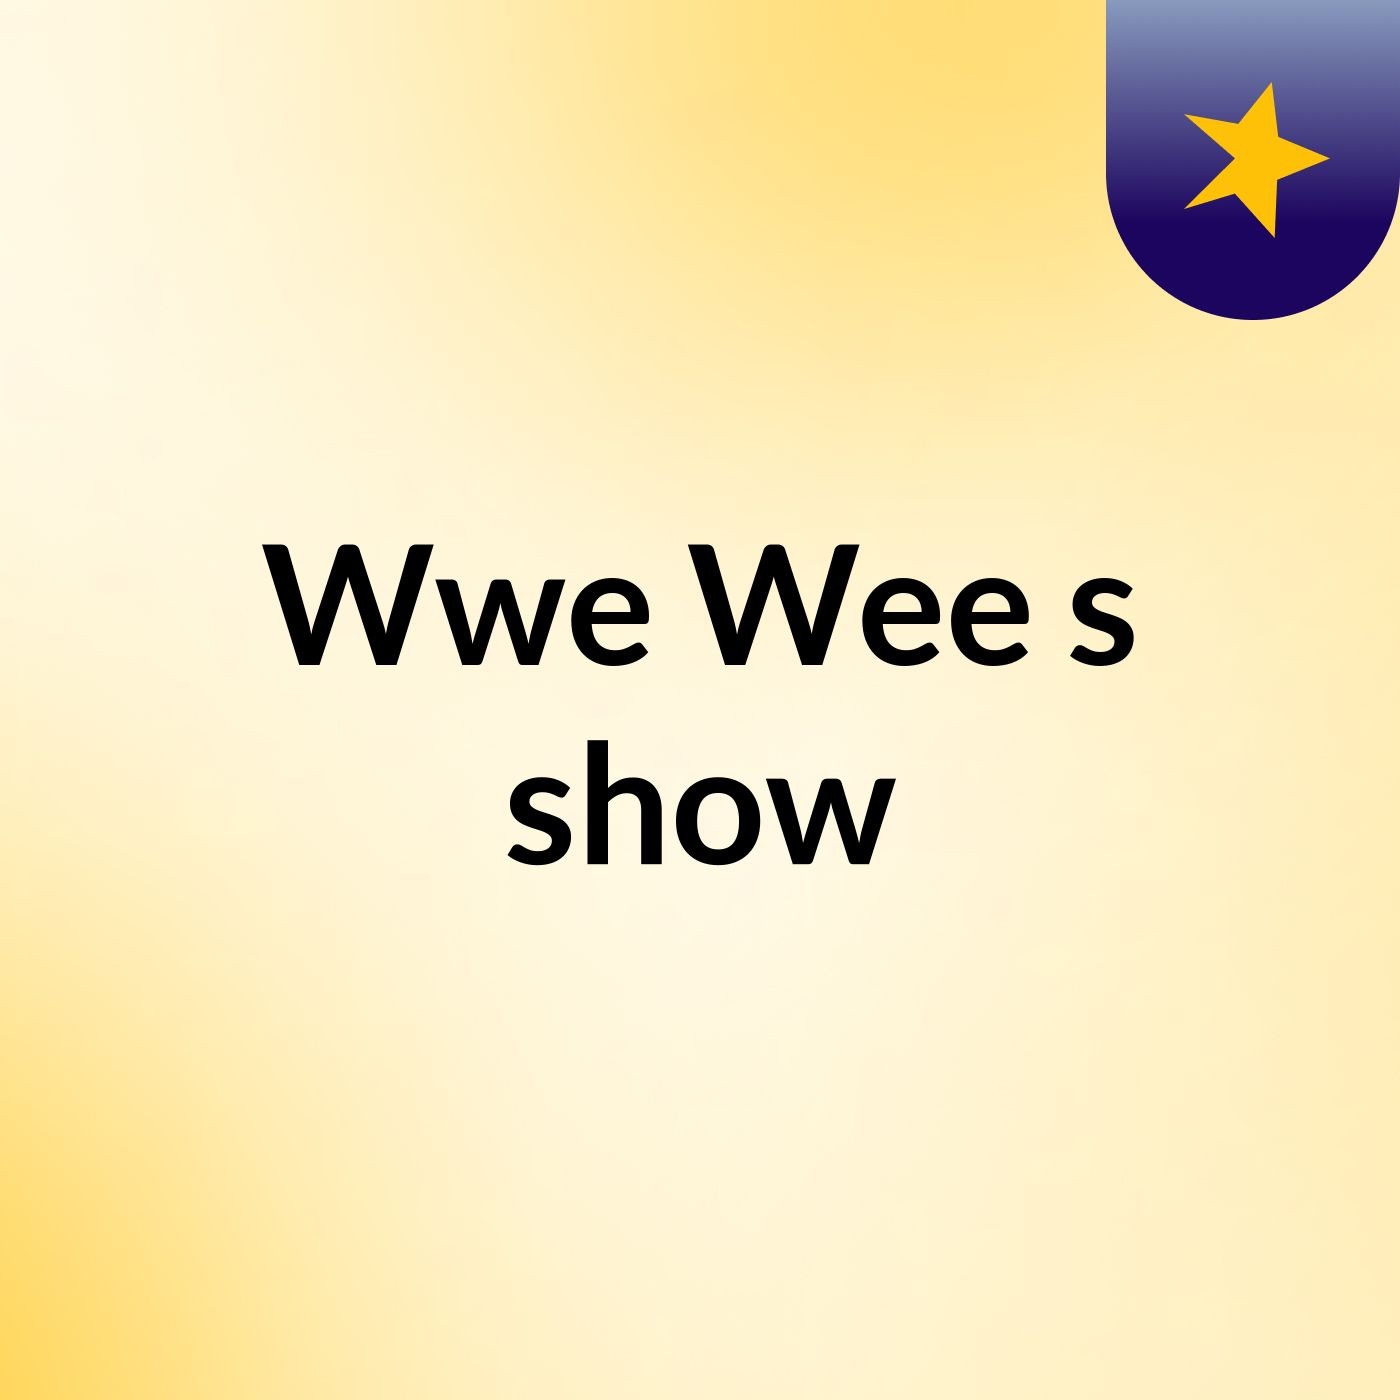 Wwe Wee's show